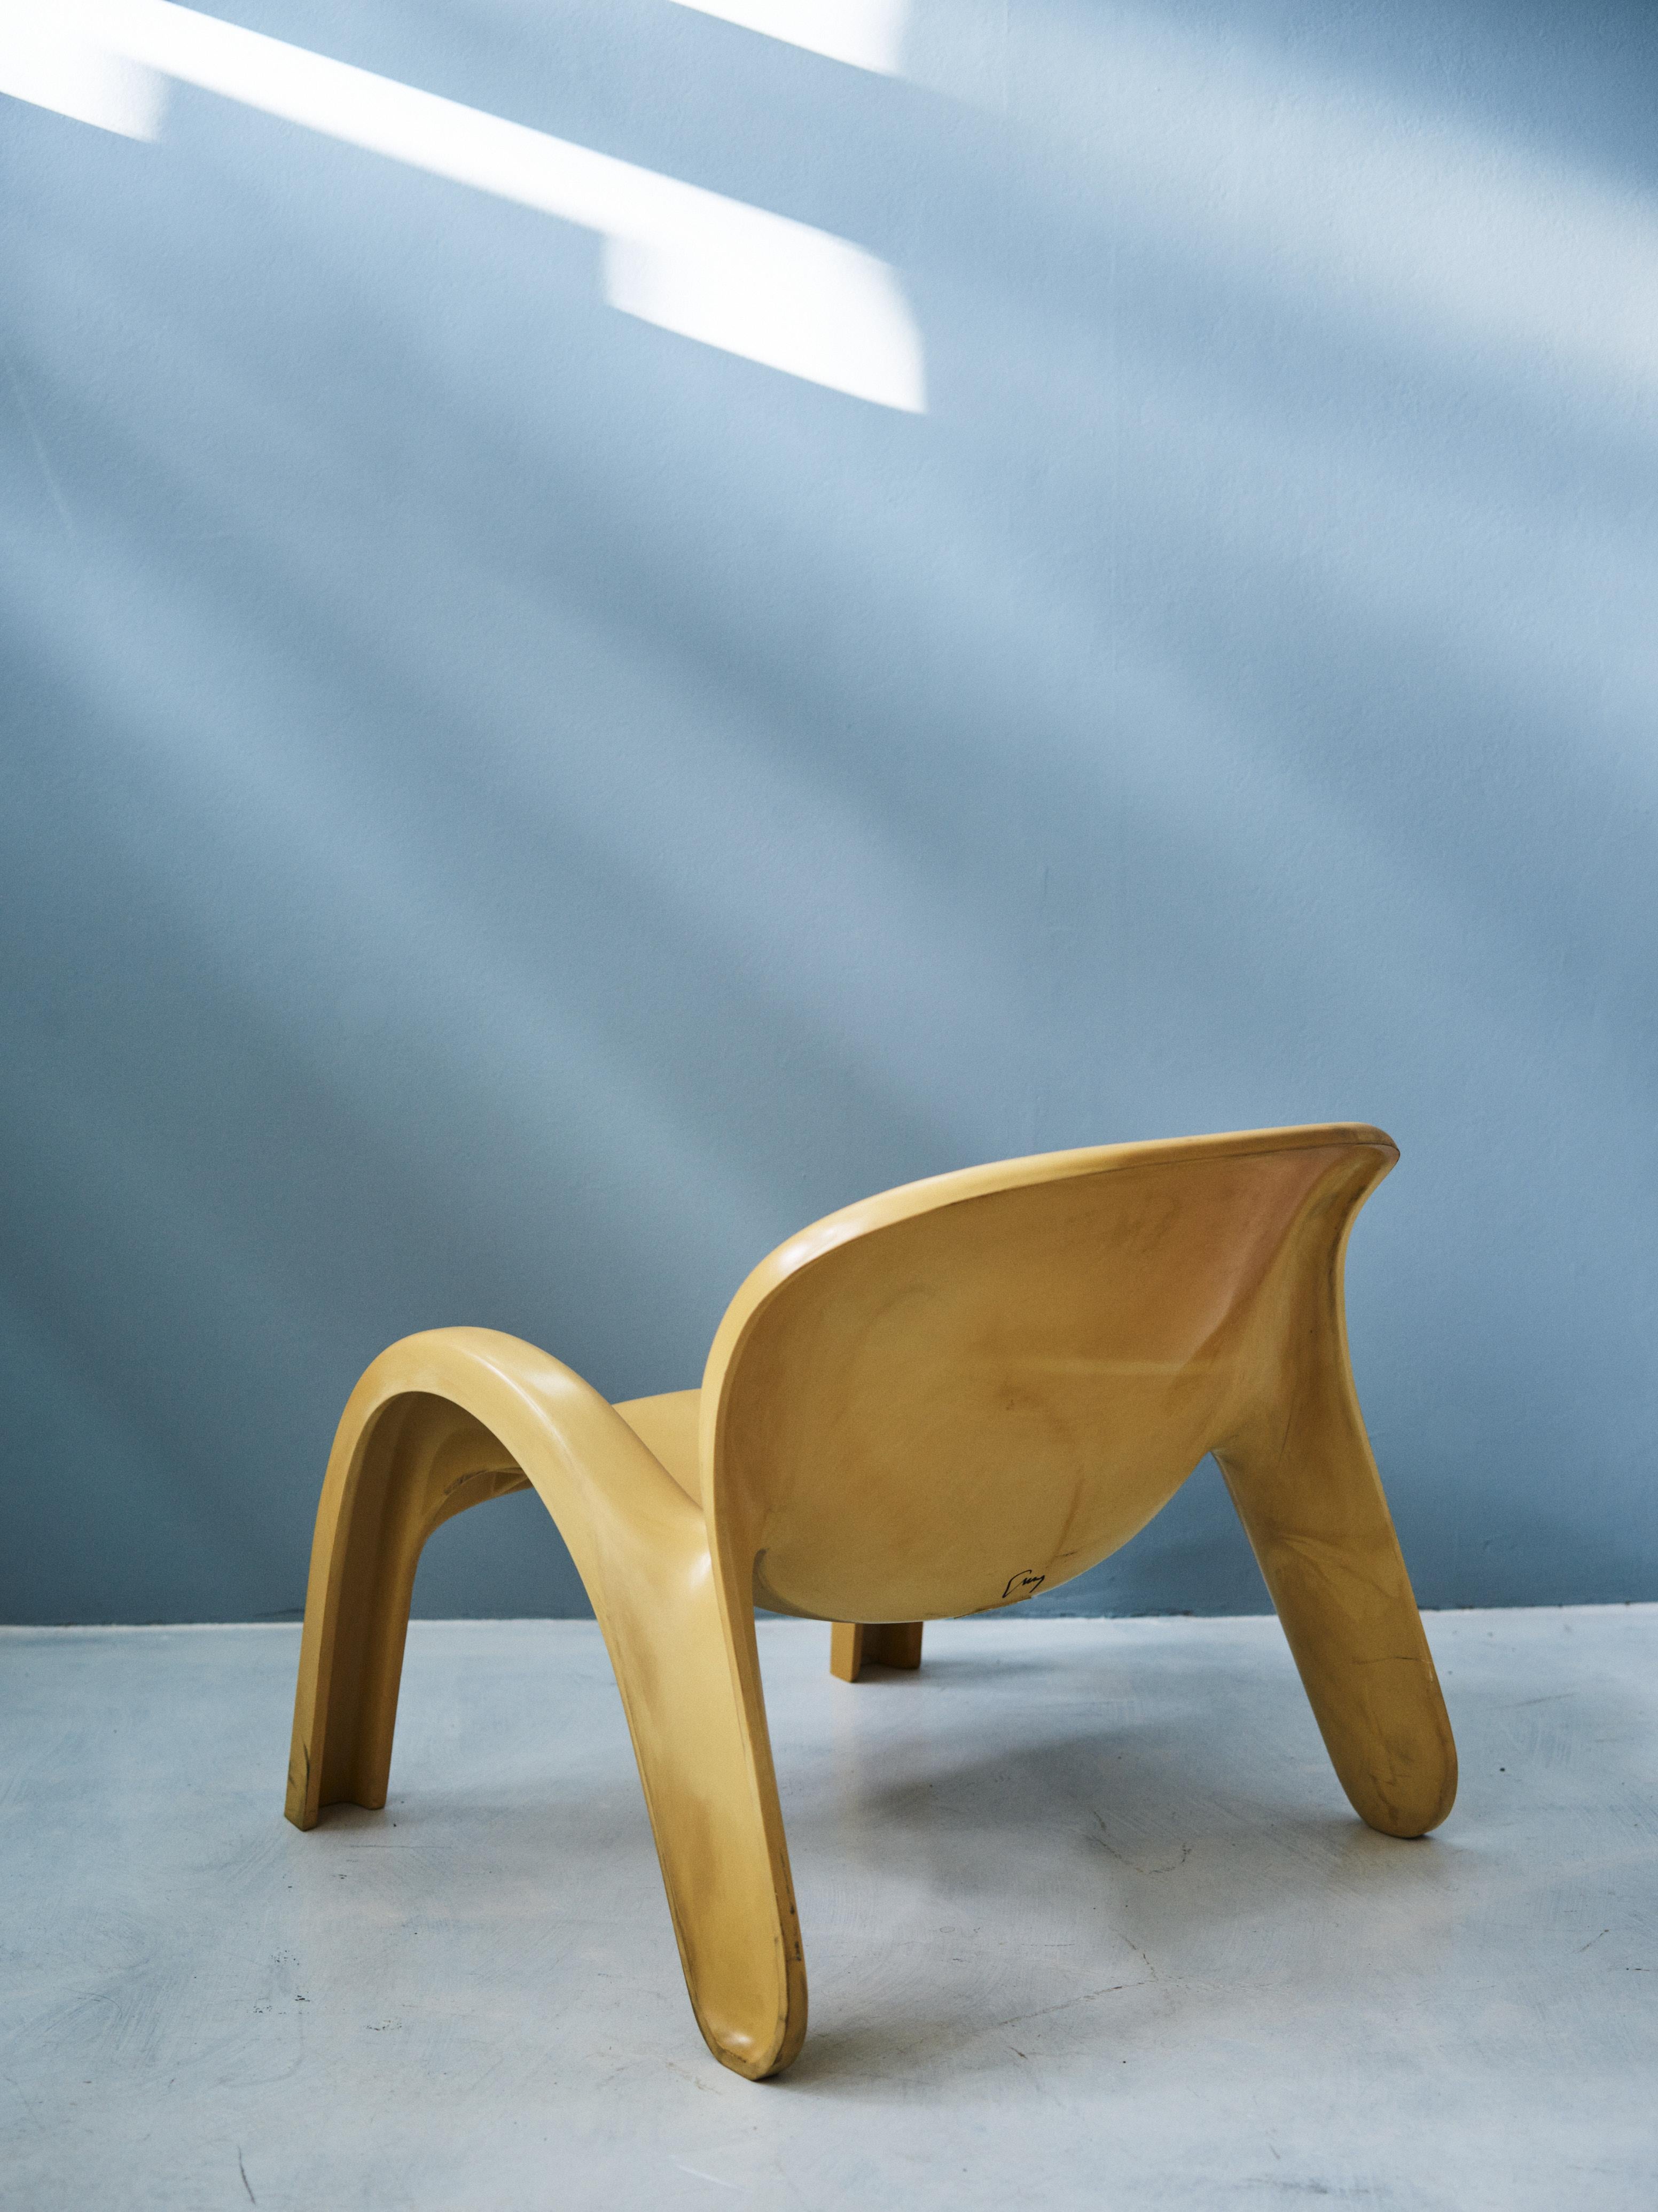 This late 20th century garden chair is one of Peter Ghyczy's most acclaimed design pieces as he designed and produced the collectable chair in 1969, using only polyurethane. The chair features a striking dynamic design, that resembles sand-coloured